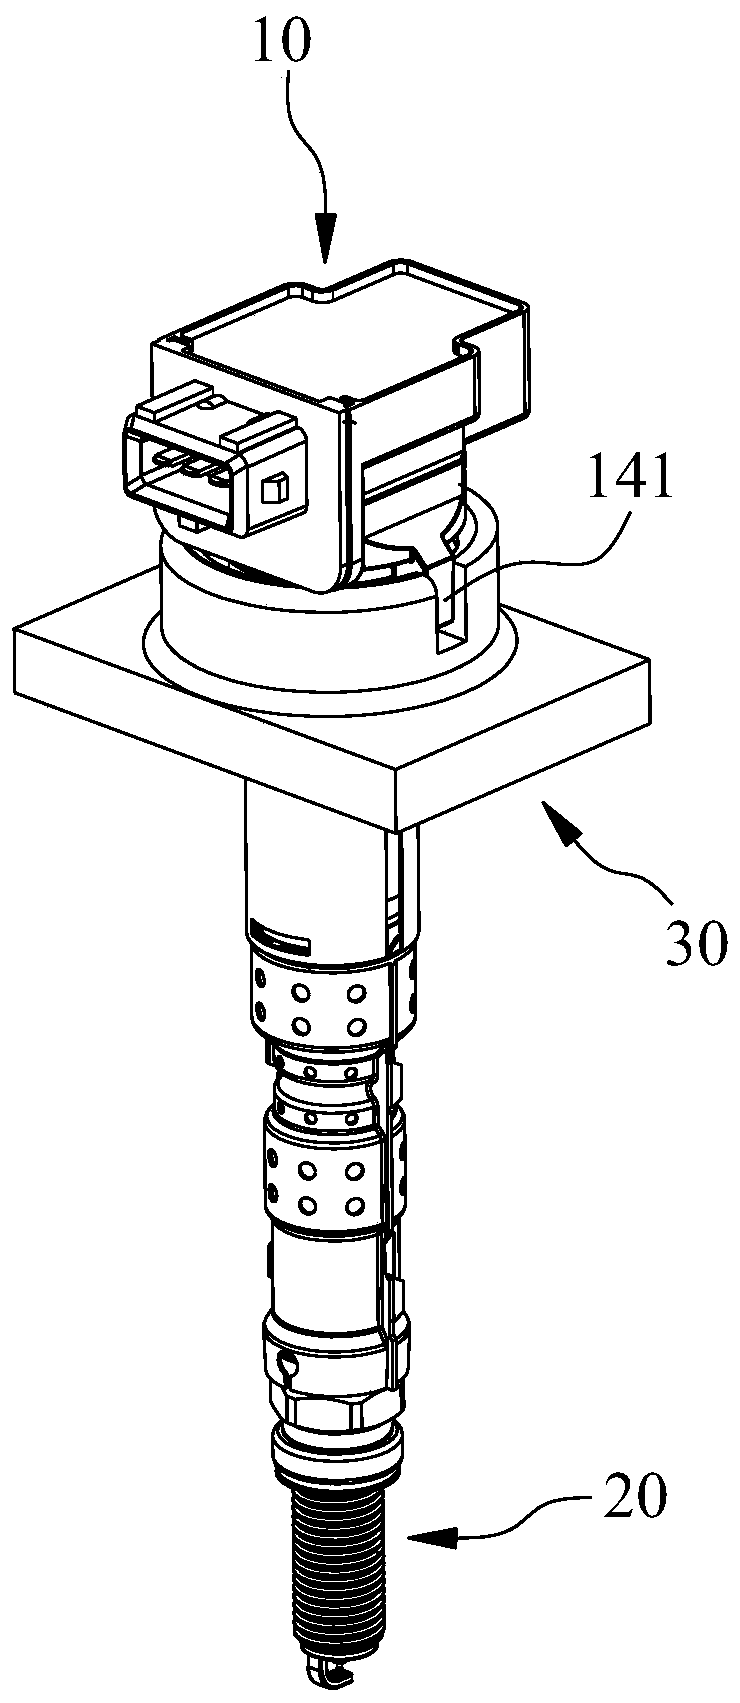 Installation structure of the ignition coil